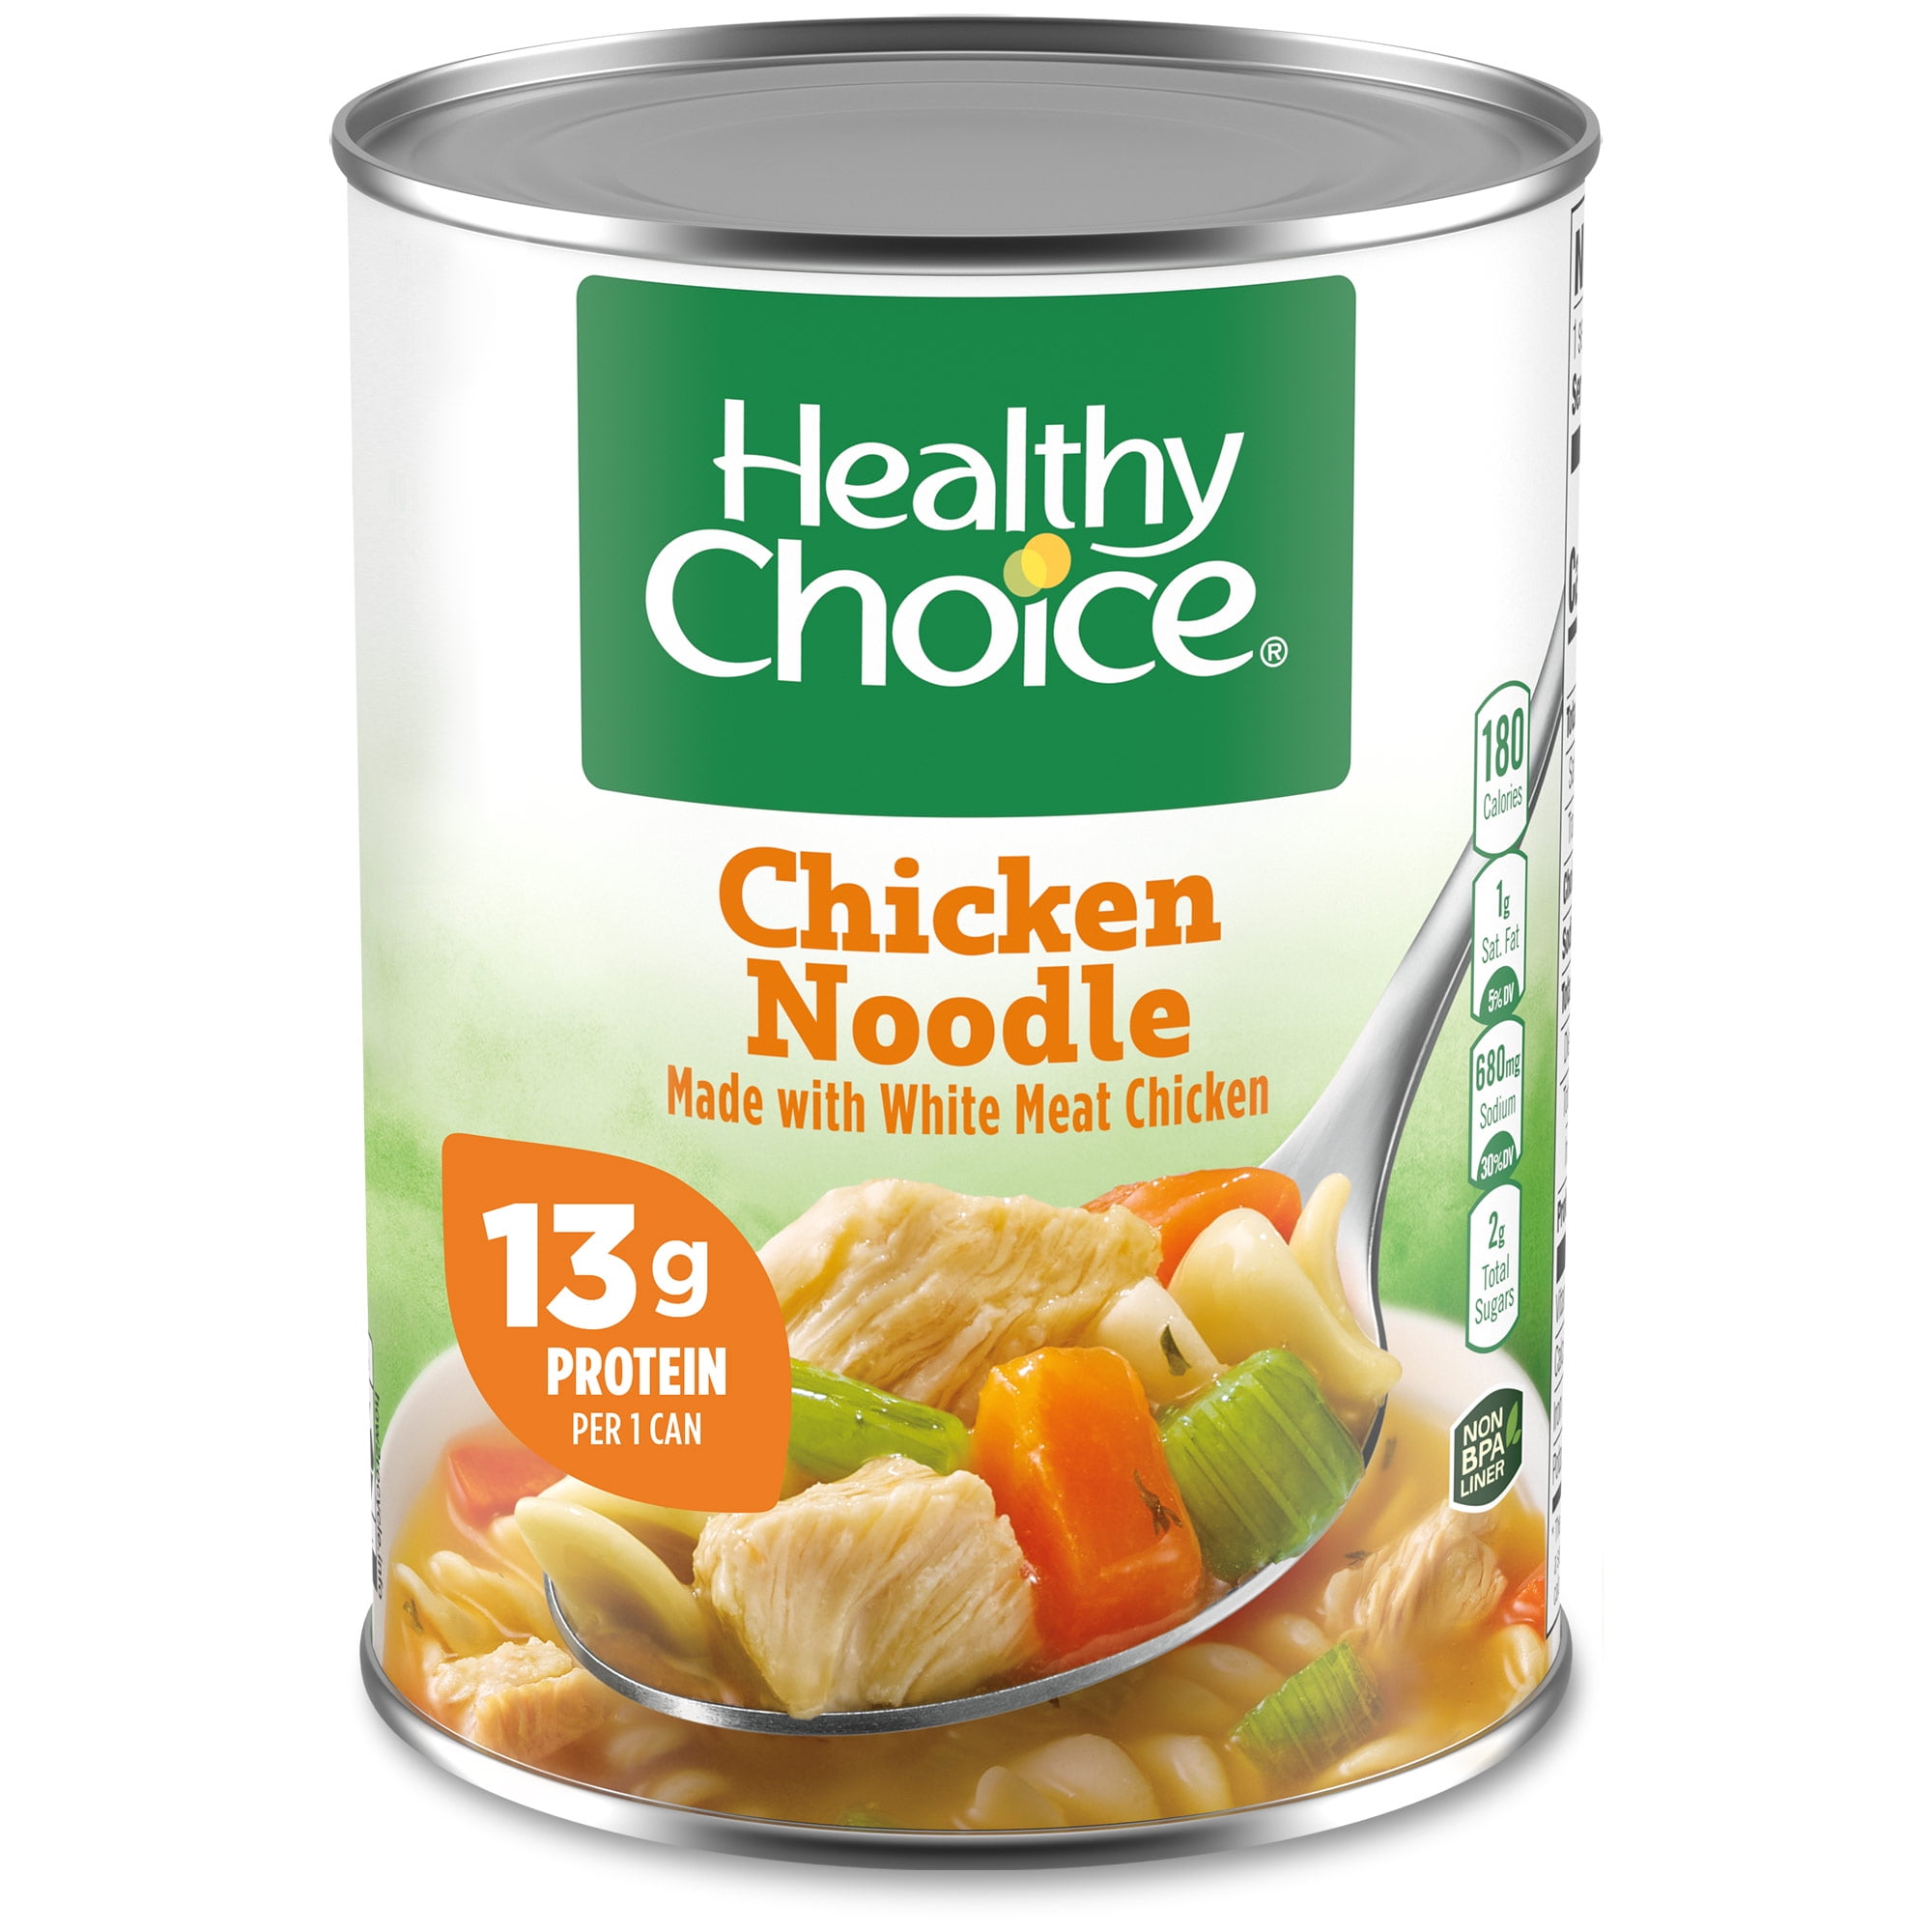 Healthy Choice Soup in Pantry